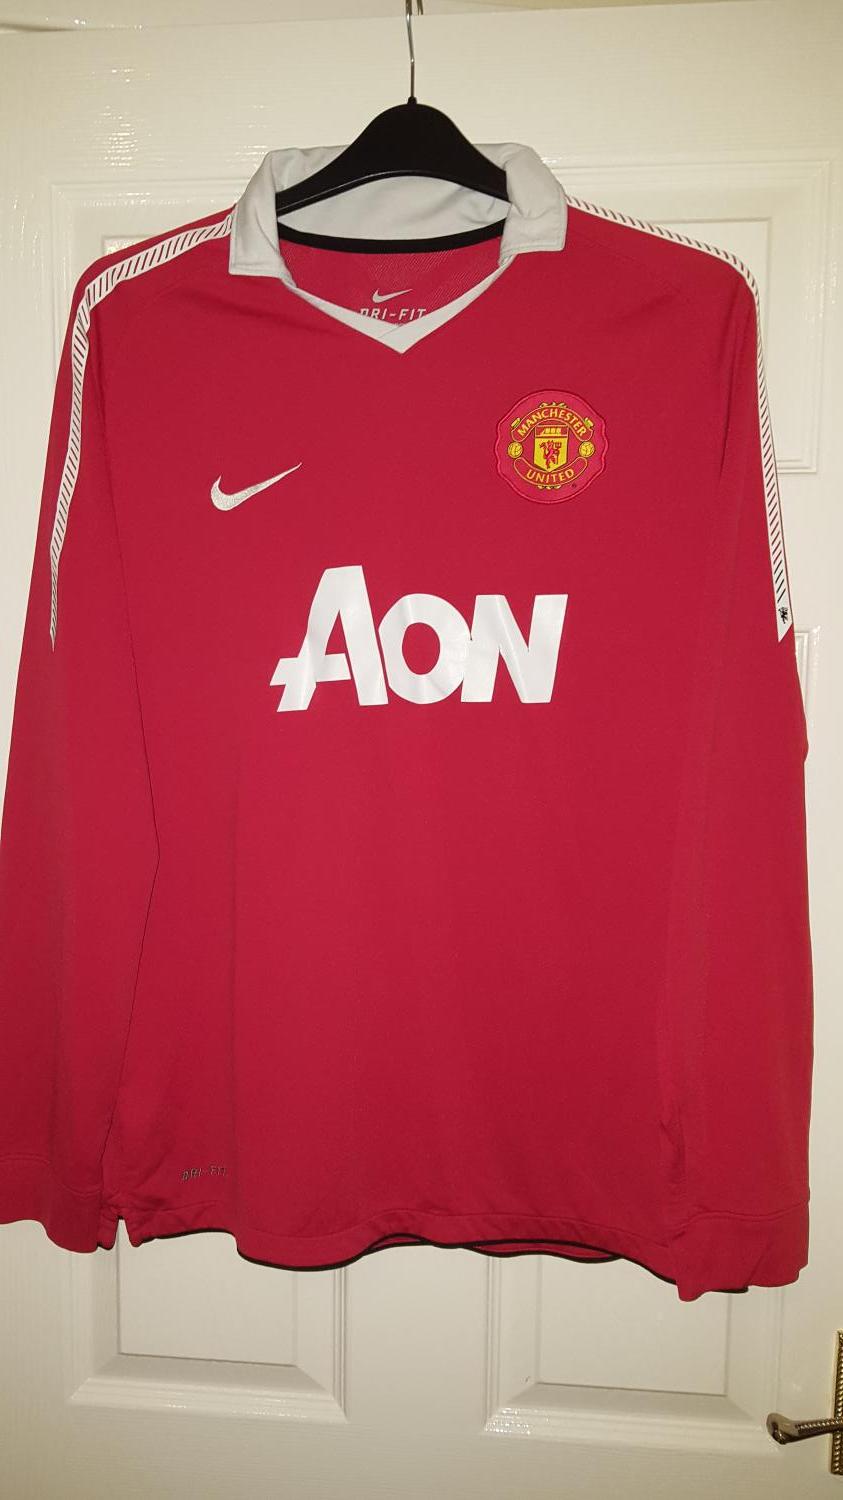 Manchester United Home Maillot de foot 2010 - 2011. Sponsored by AON